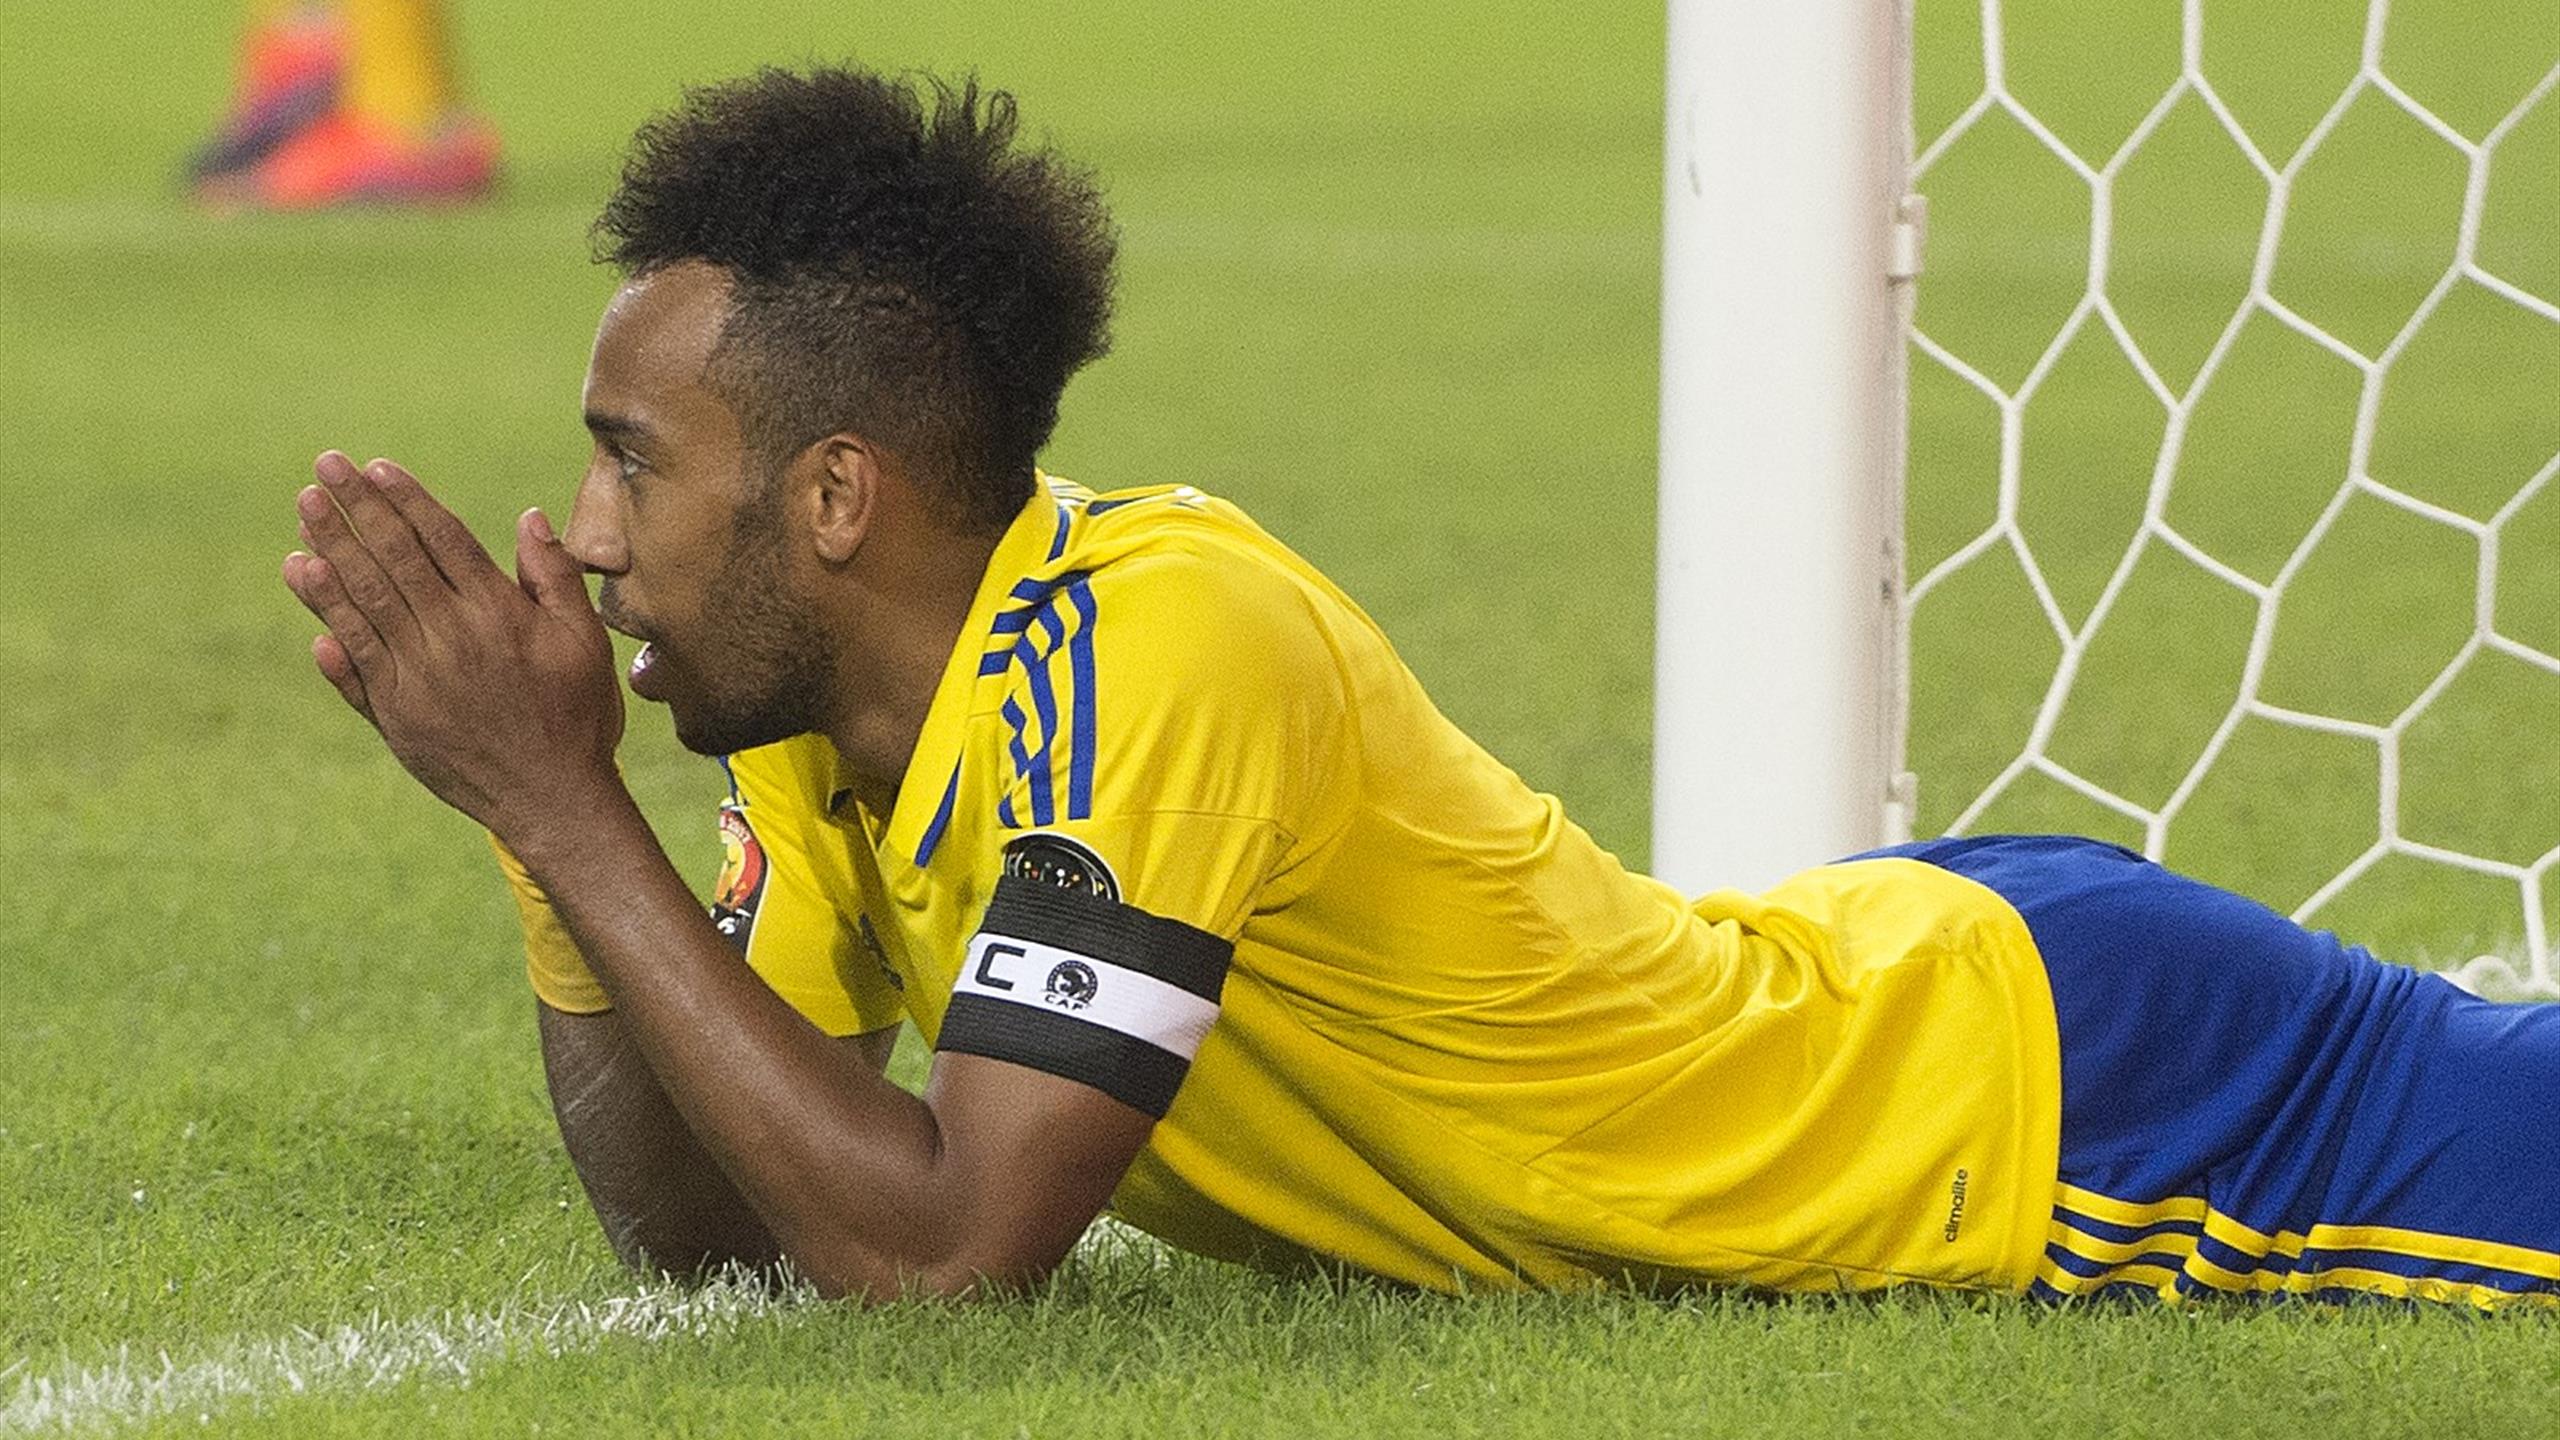 'Aubameyang is an important person in the team' - Gabon defender